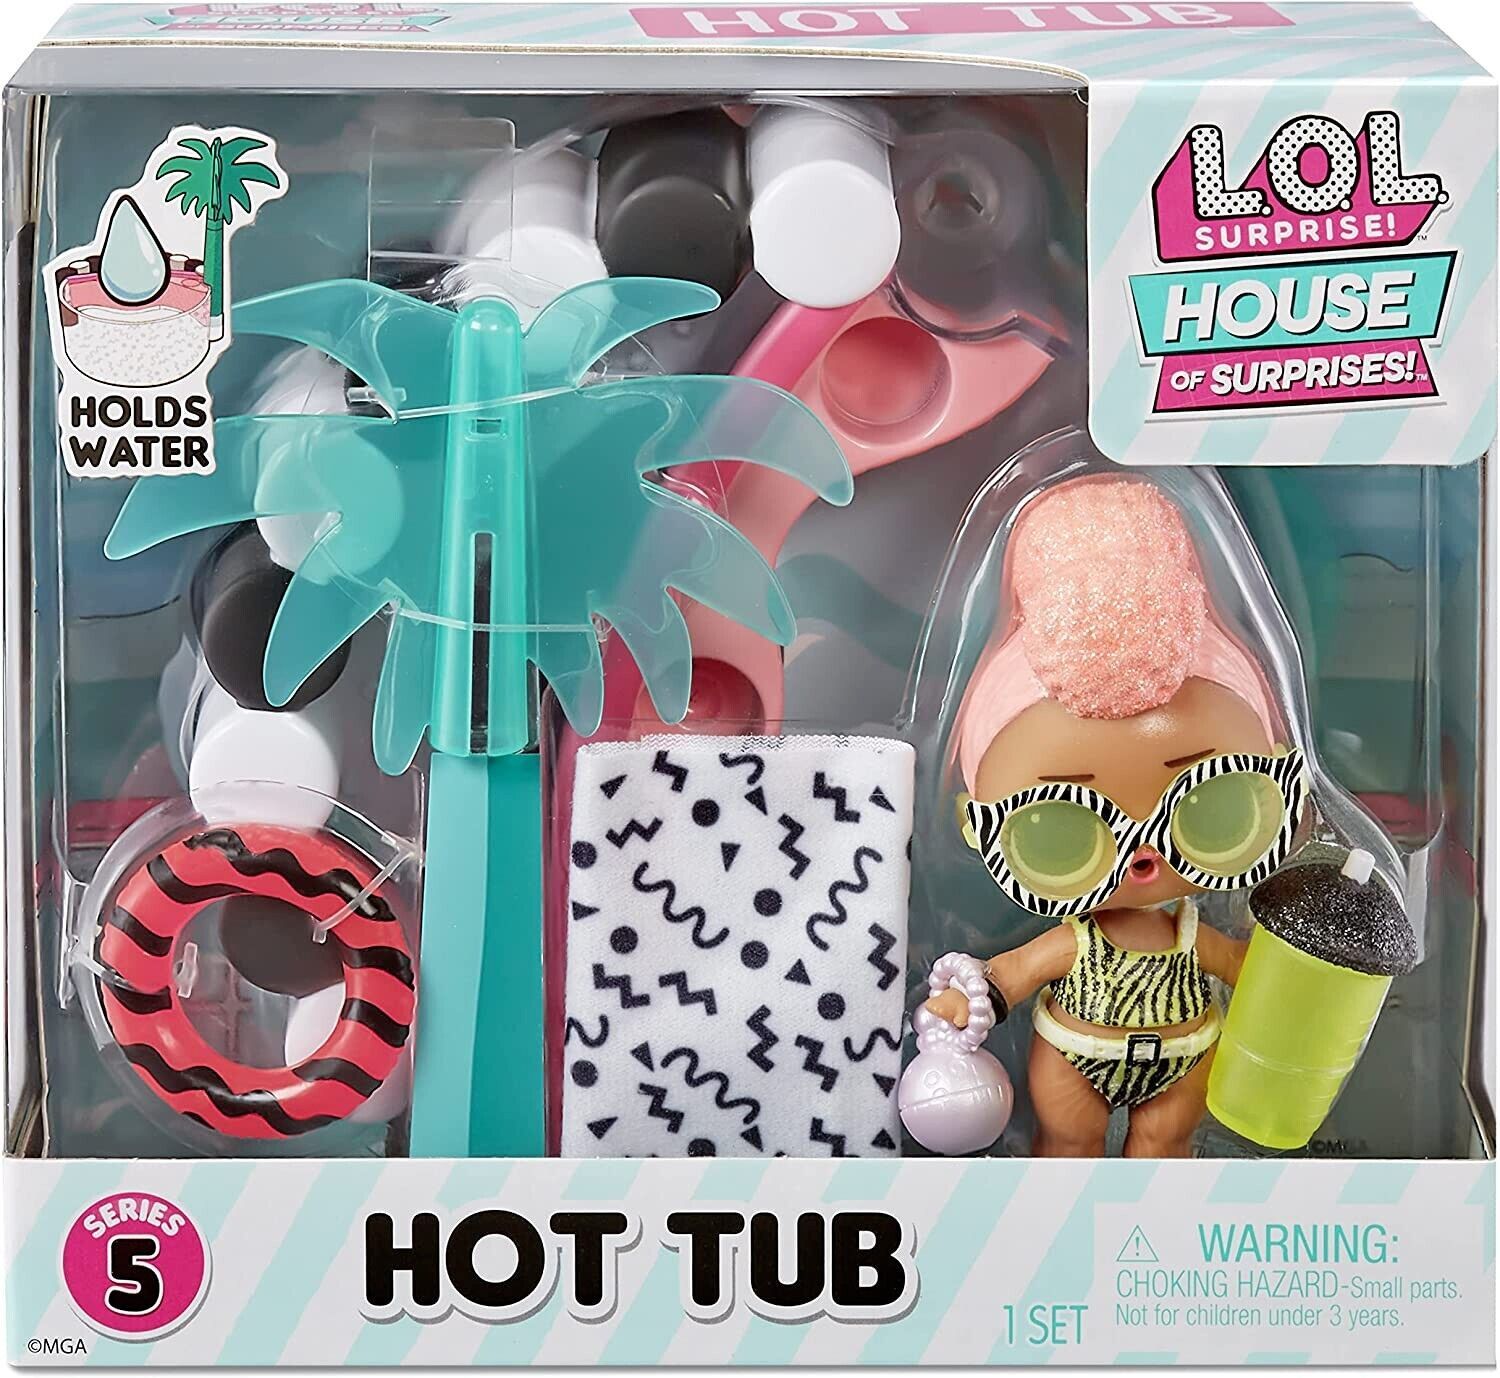 LOL Surprise OMG House of Surprises Hot Tub Playset with Yacht B.B. Collectible - $16.70